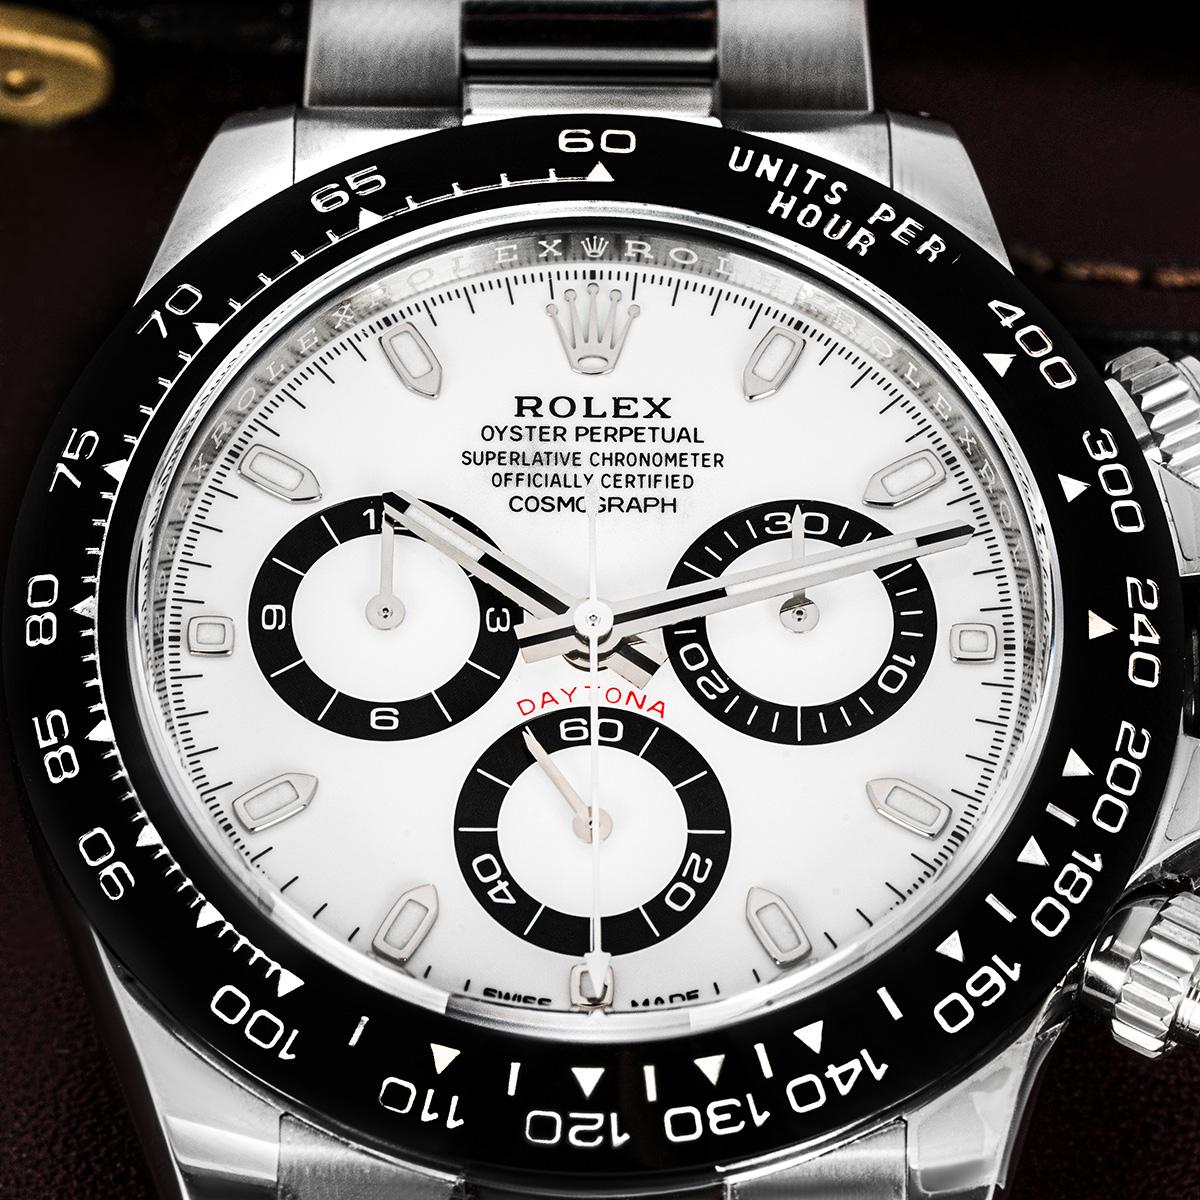 A Cosmograph Daytona from Rolex in stainless steel. Featuring the highly desired white dial and black ceramic bezel with a moulded tachymetric scale.

Fitted with a sapphire crystal, a calibre 4130 self-winding automatic chronograph movement and an